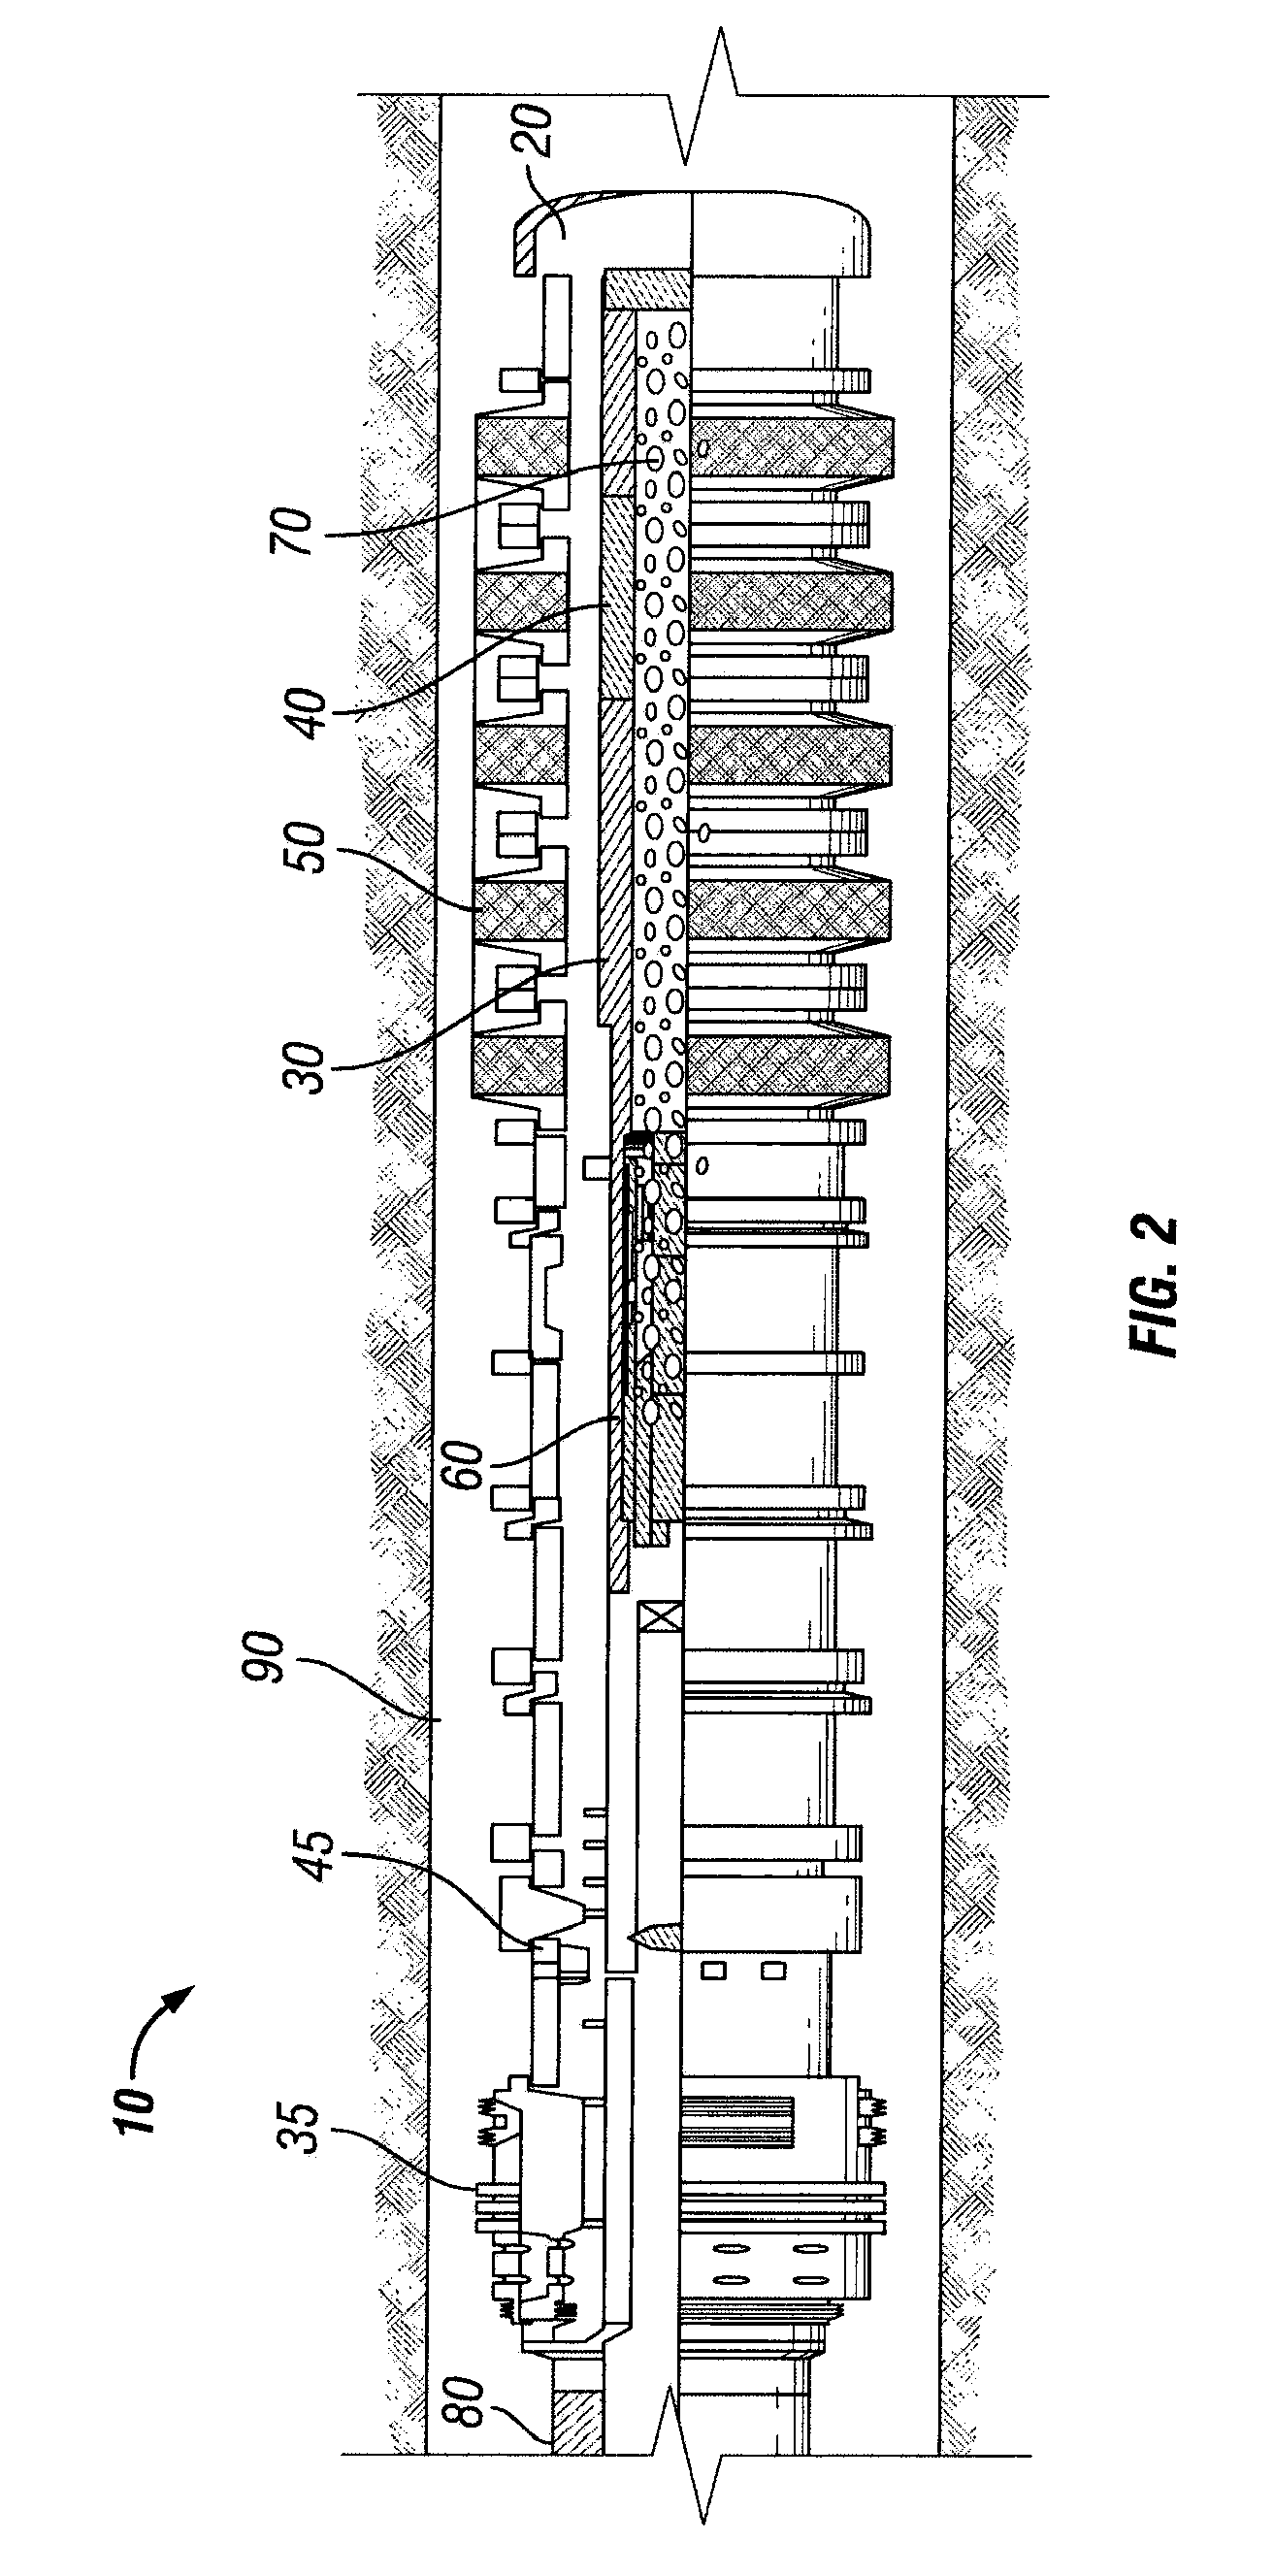 System and method for a low drag flotation system